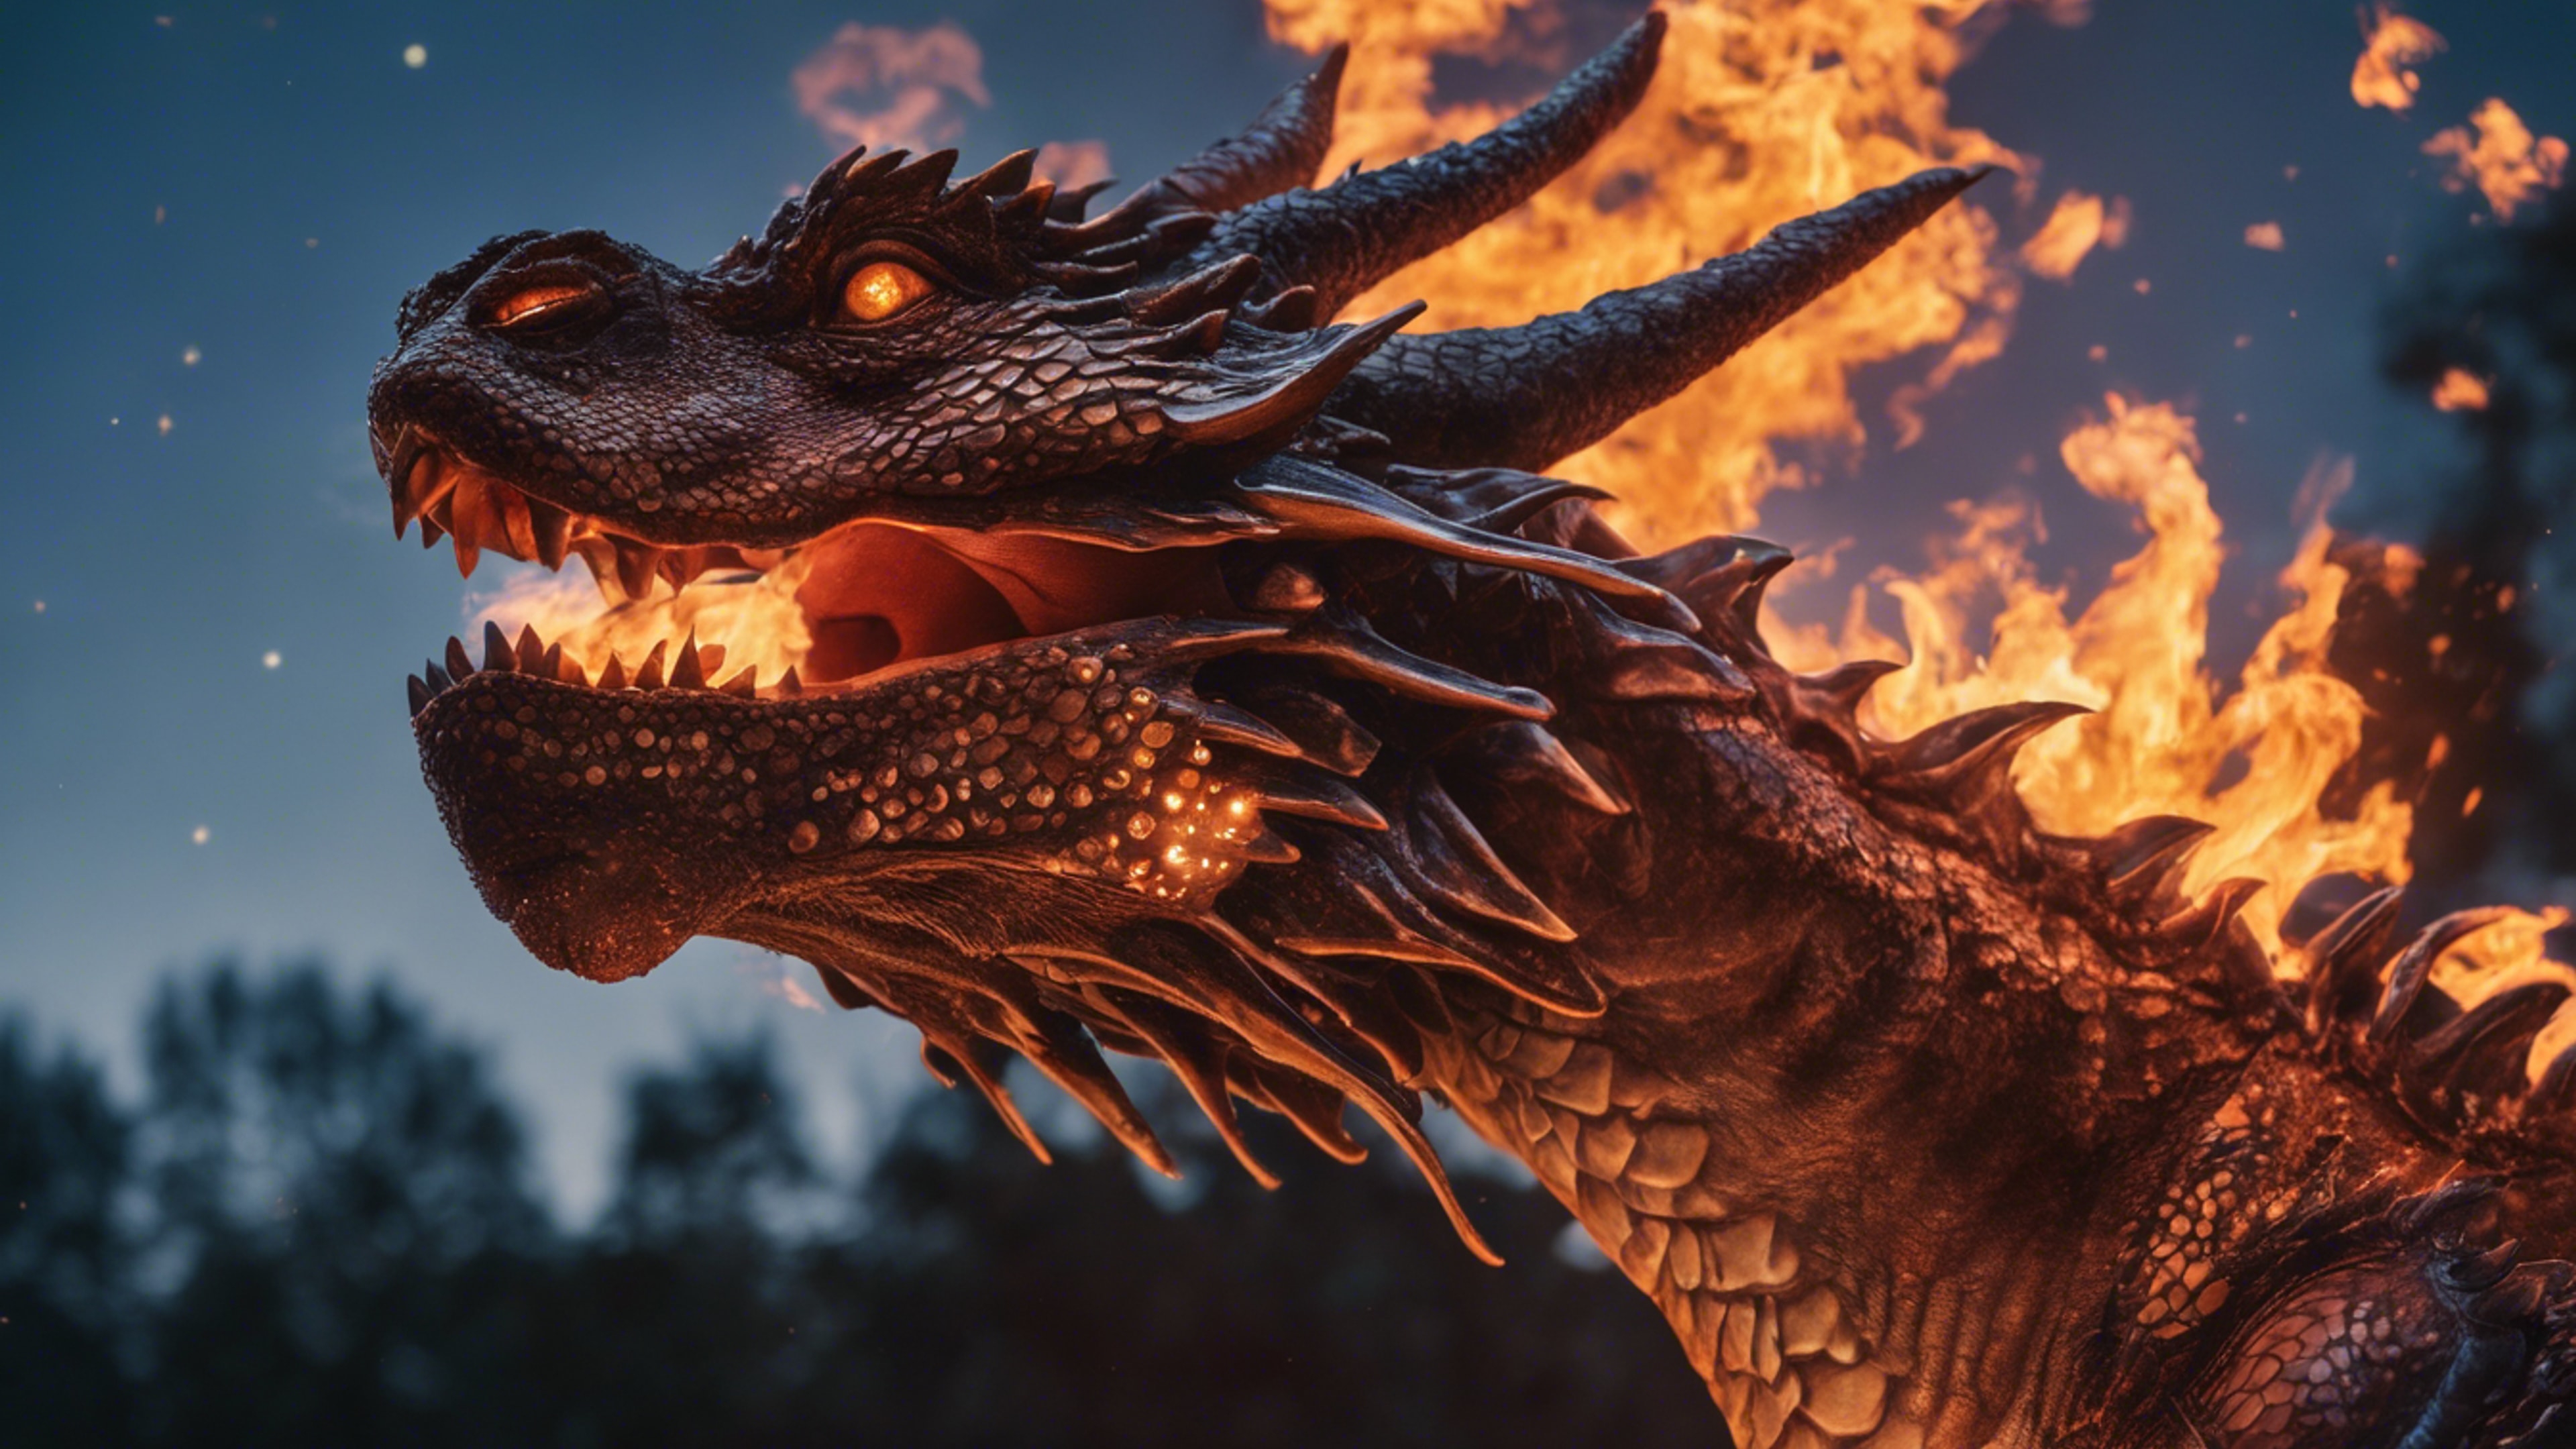 A fire-breathing dragon surrounded by the glow of its own flames against a night sky. Divar kağızı[8f1bf836869843a19451]